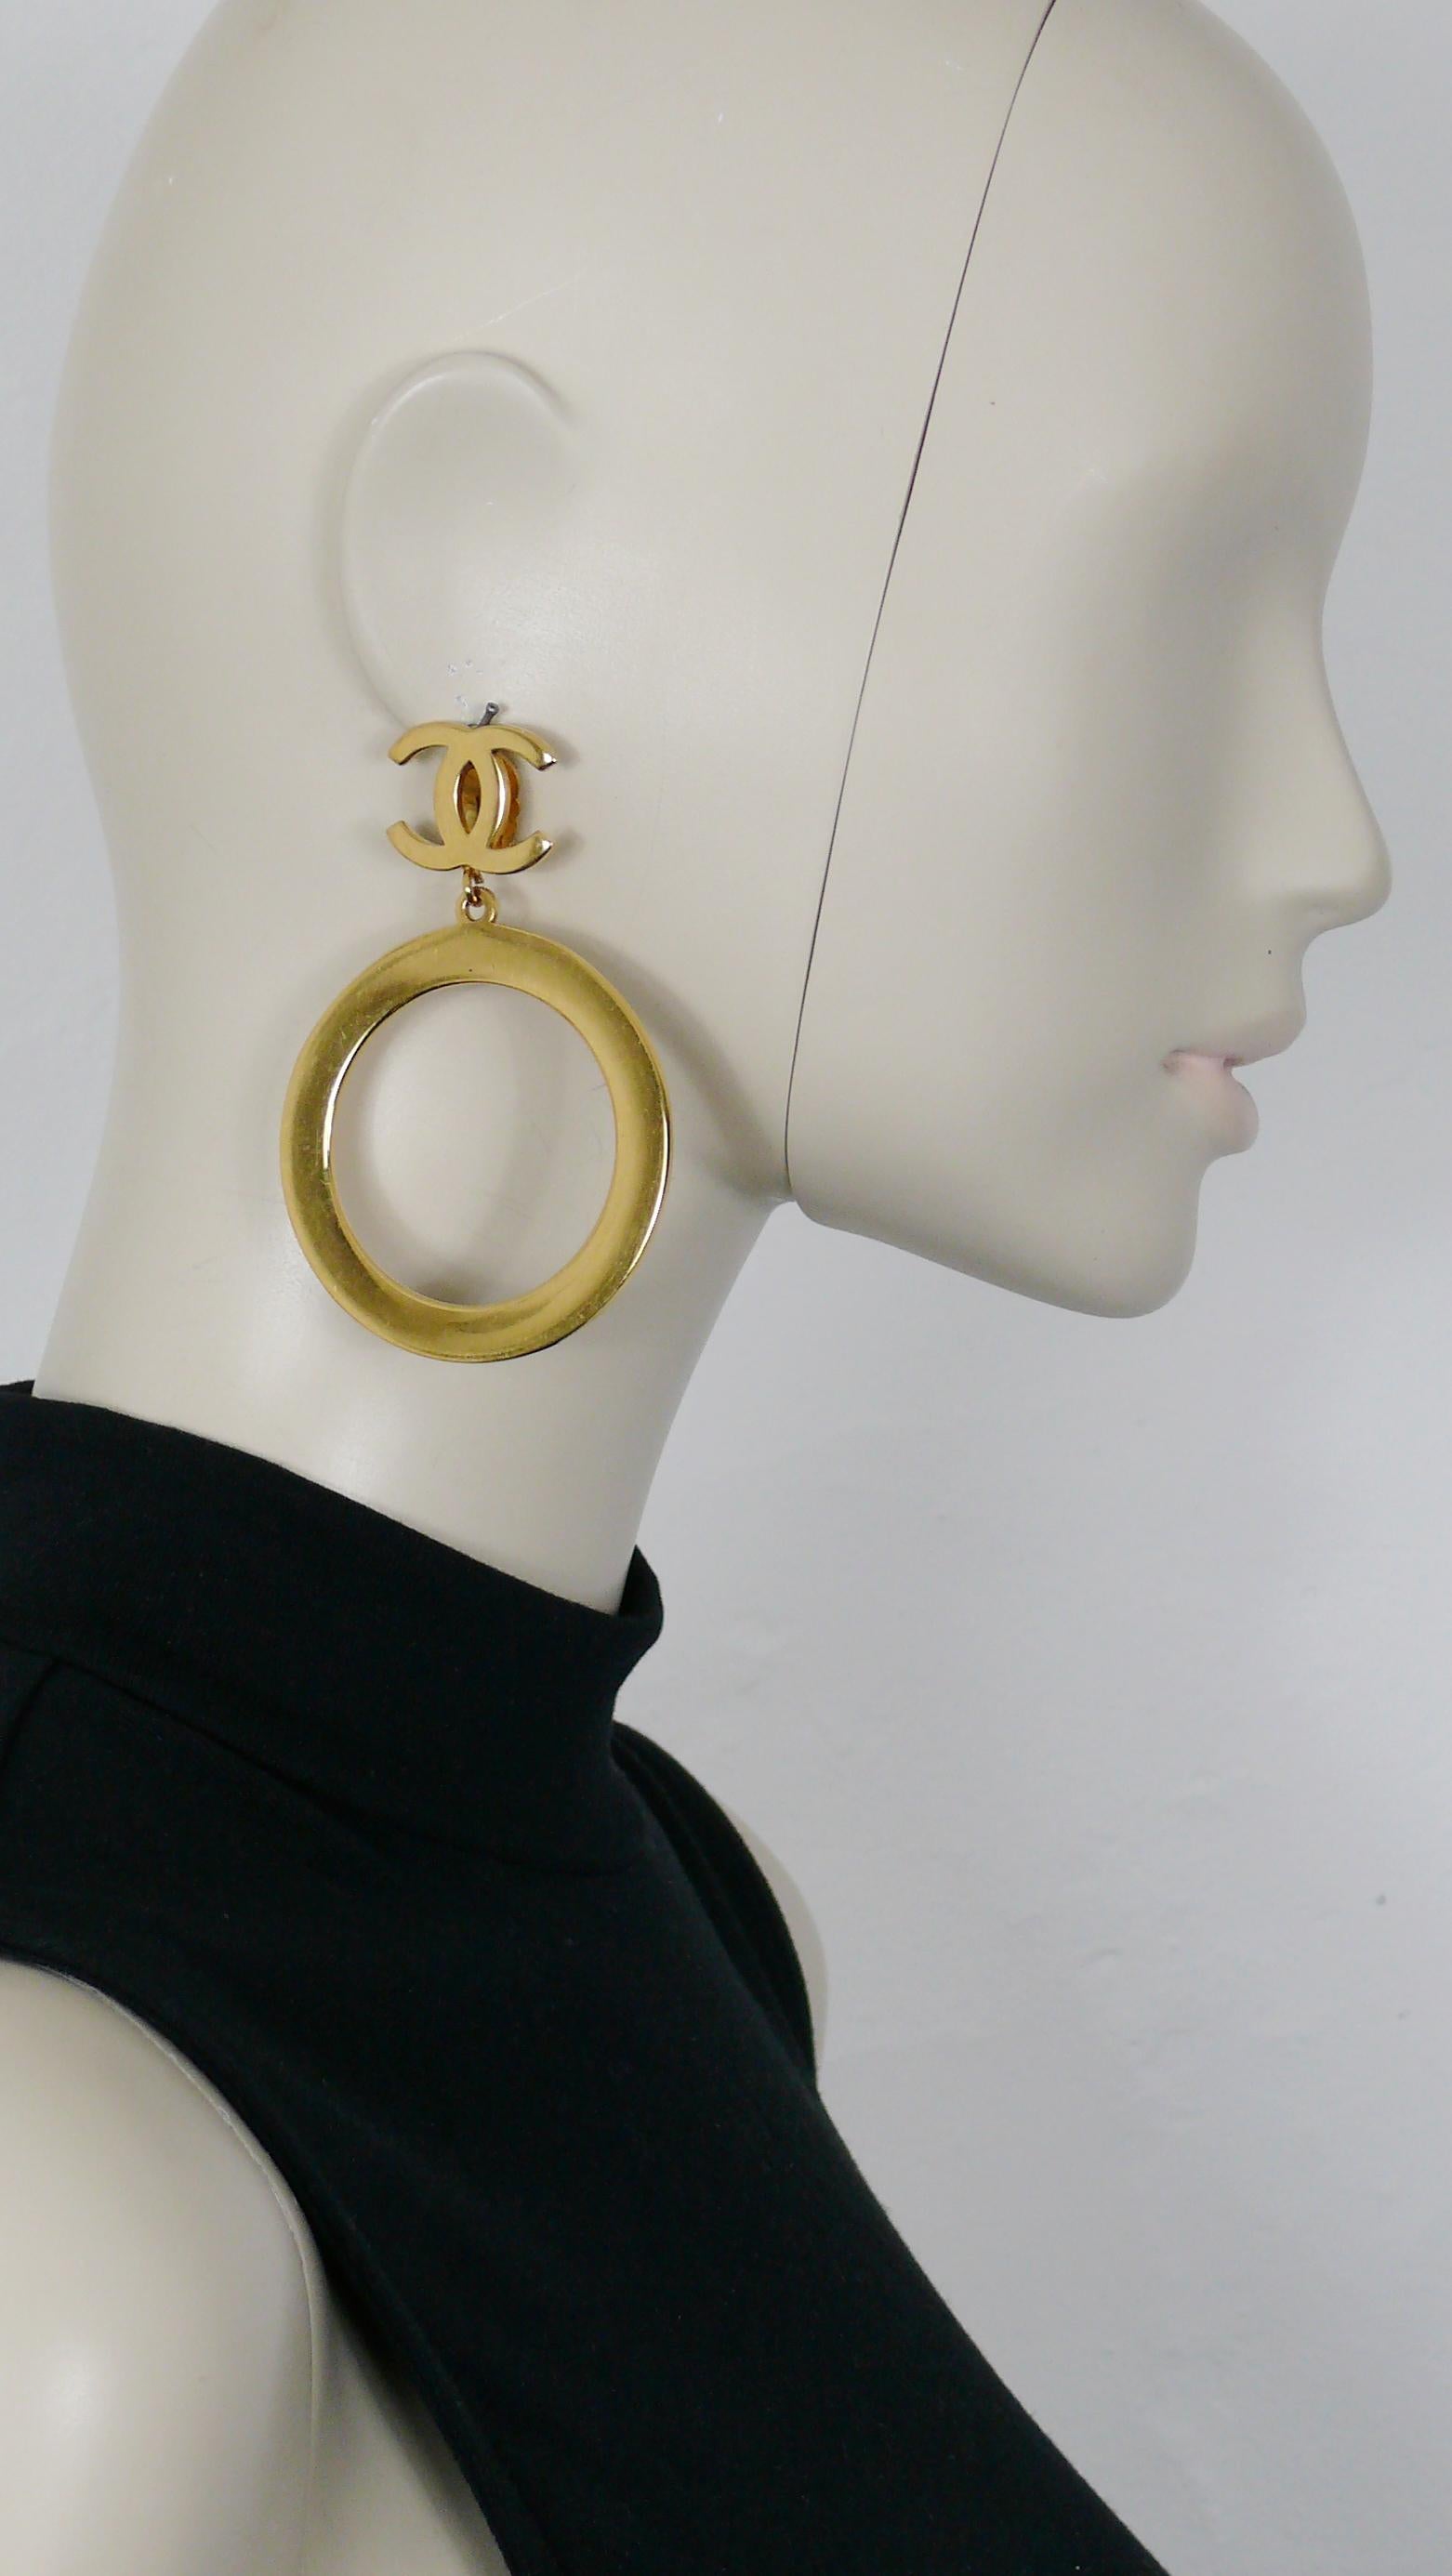 CHANEL vintage massive and iconic gold toned hoop dangling earrings (clip-on) featuring a CC logo on top.

Embossed CHANEL.

Indicative measurements : height approx. 8.6 cm (3.39 inches) / hoop diameter approx. 6 cm (2.36 inches).

NOTES
- This is a